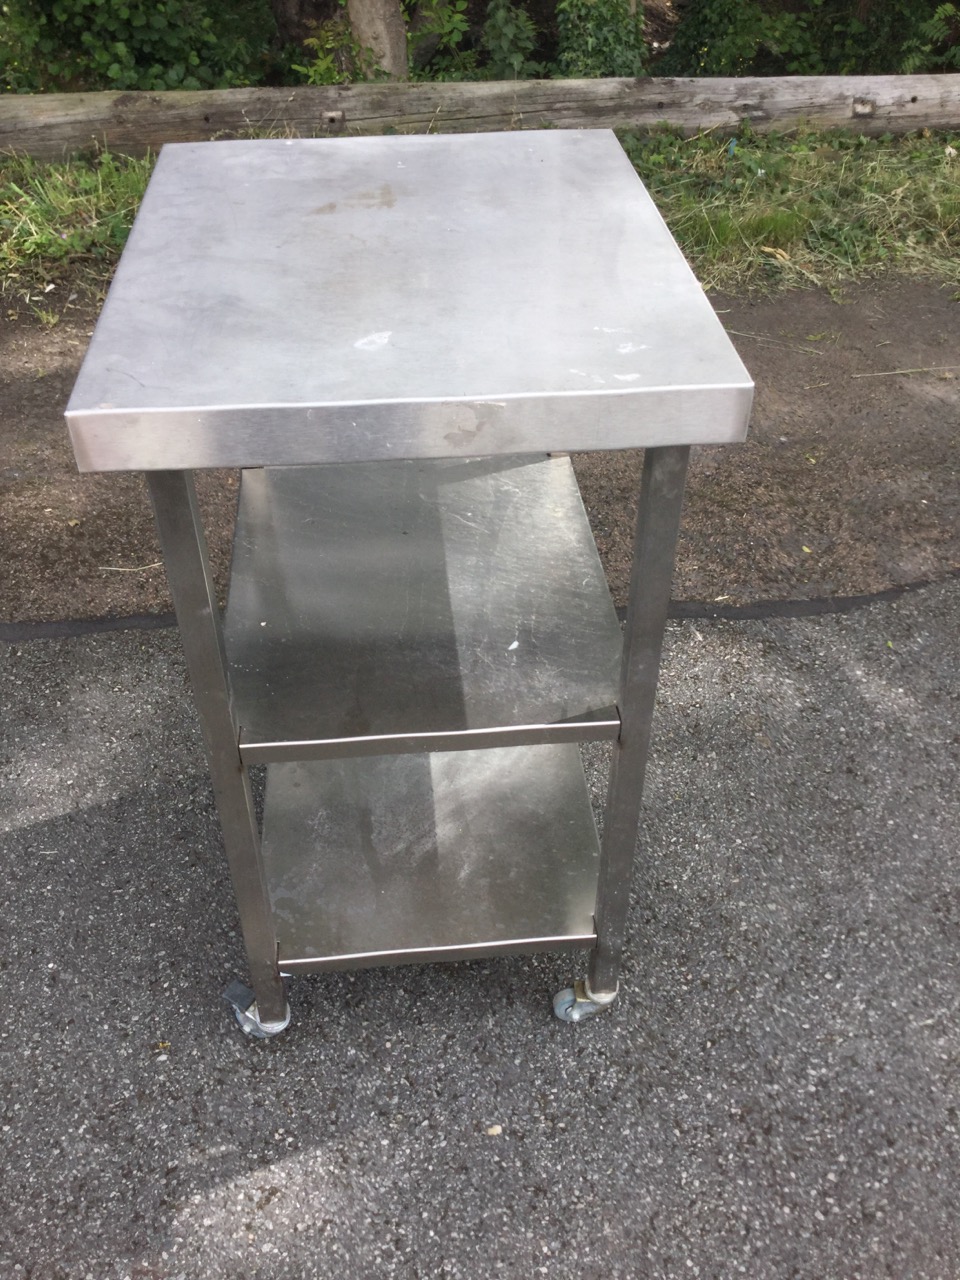 A rectangular stainless steel table with two shelves below, raised on casters. (23.5in x 19.5in x